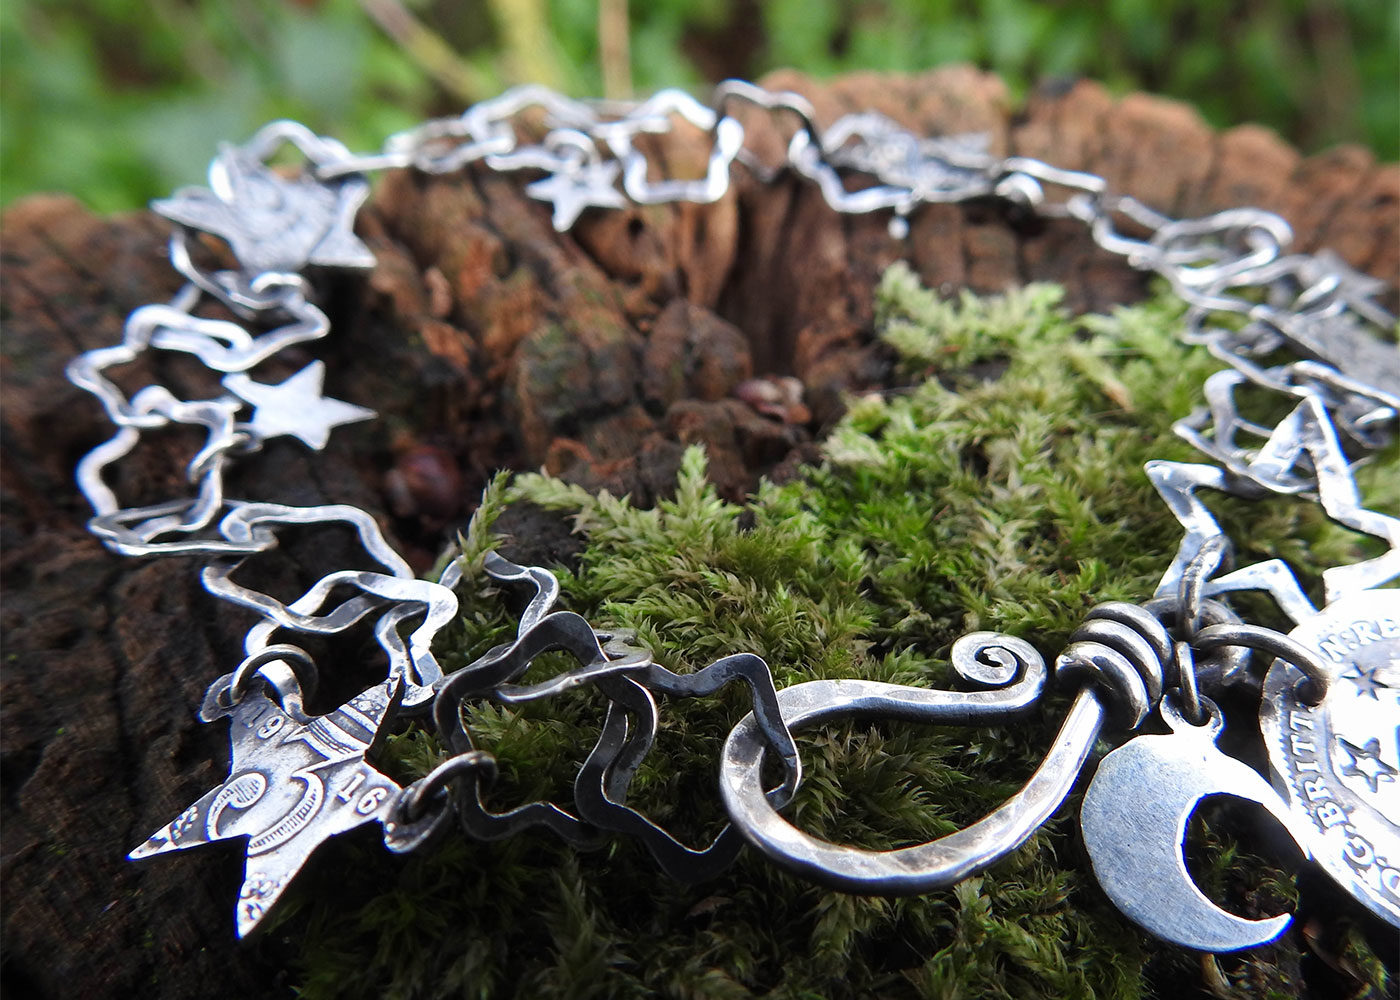 star jewellery - handmade and recycled silver bracelet